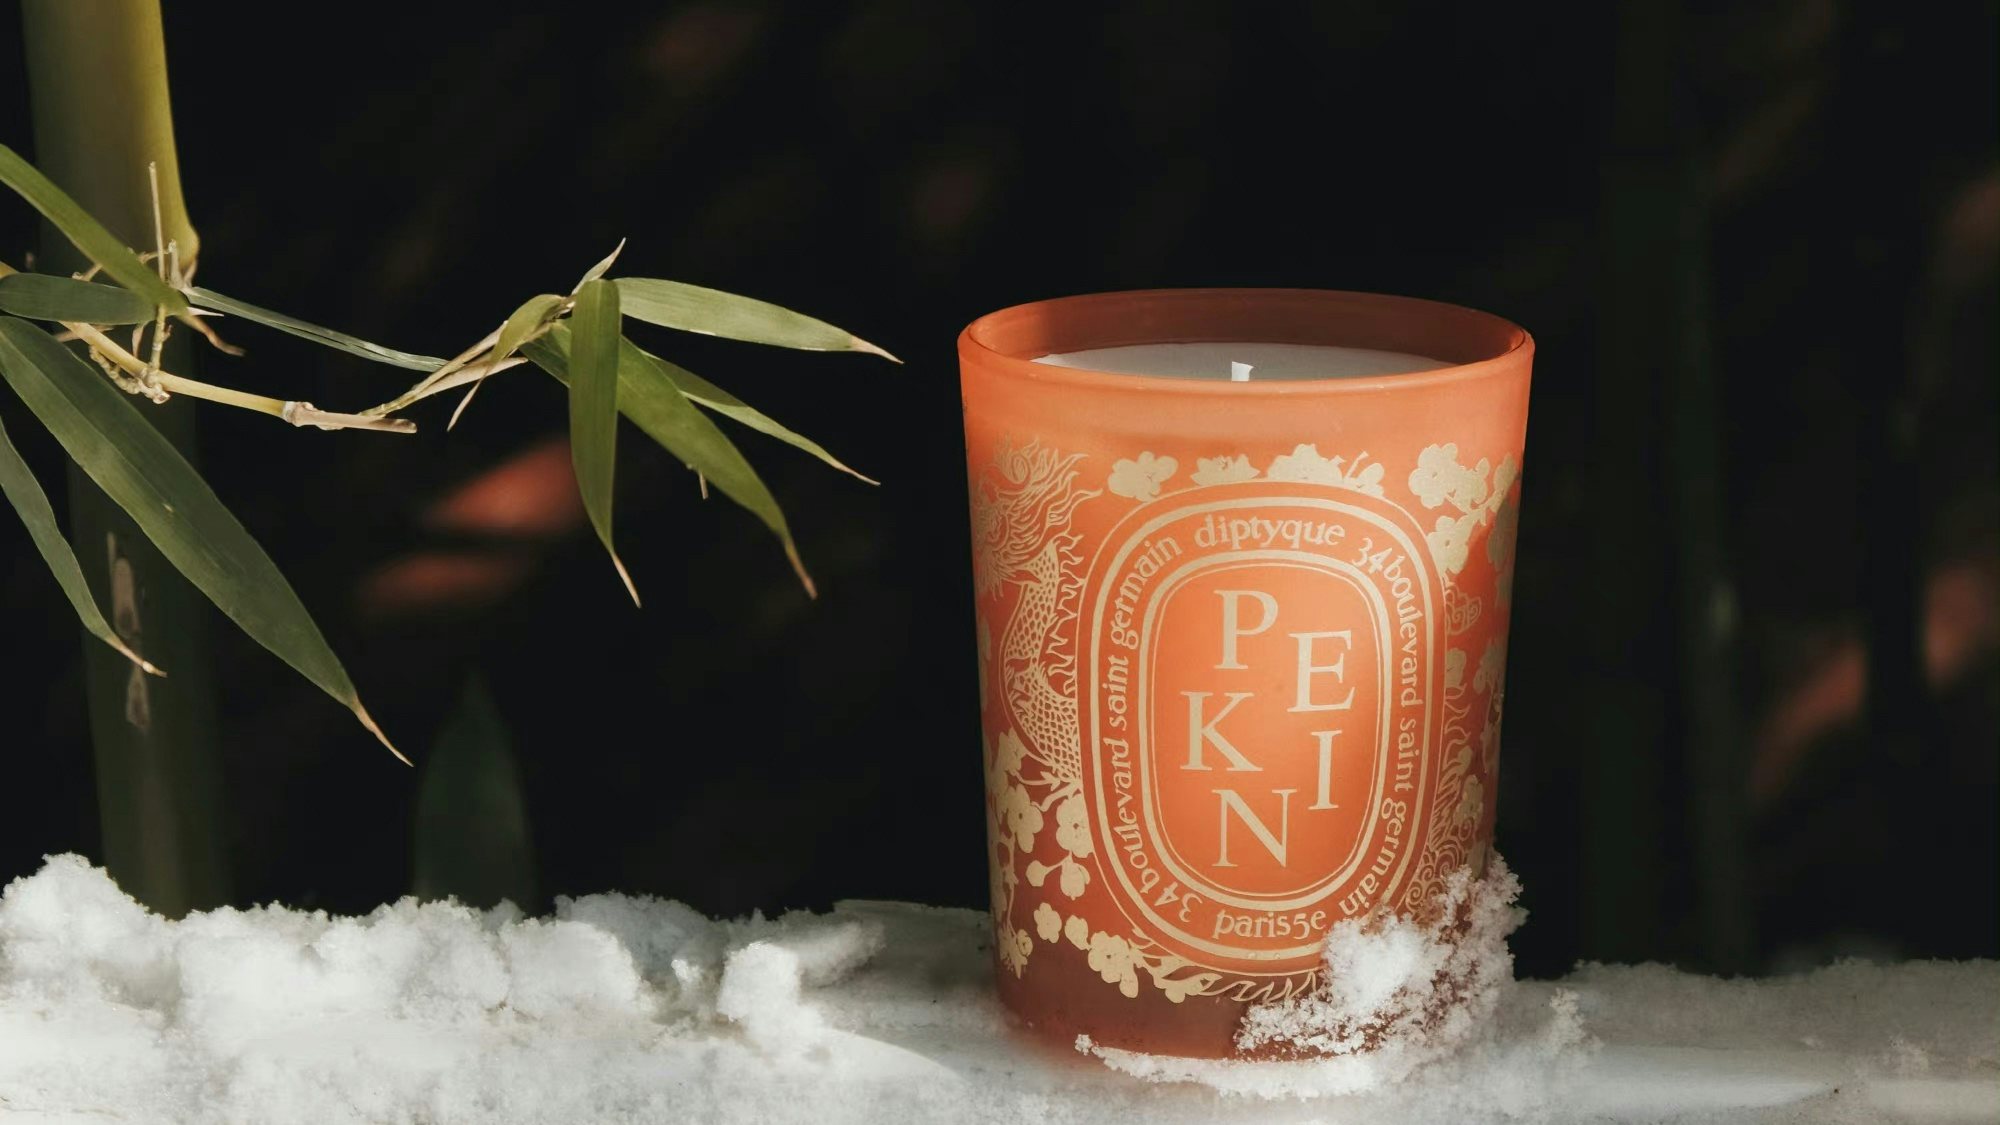 Lane Crawford China’s Head of Beauty charts the three stages of luxury scent: perfume, home fragrance, and personal care. Photo: Diptyque